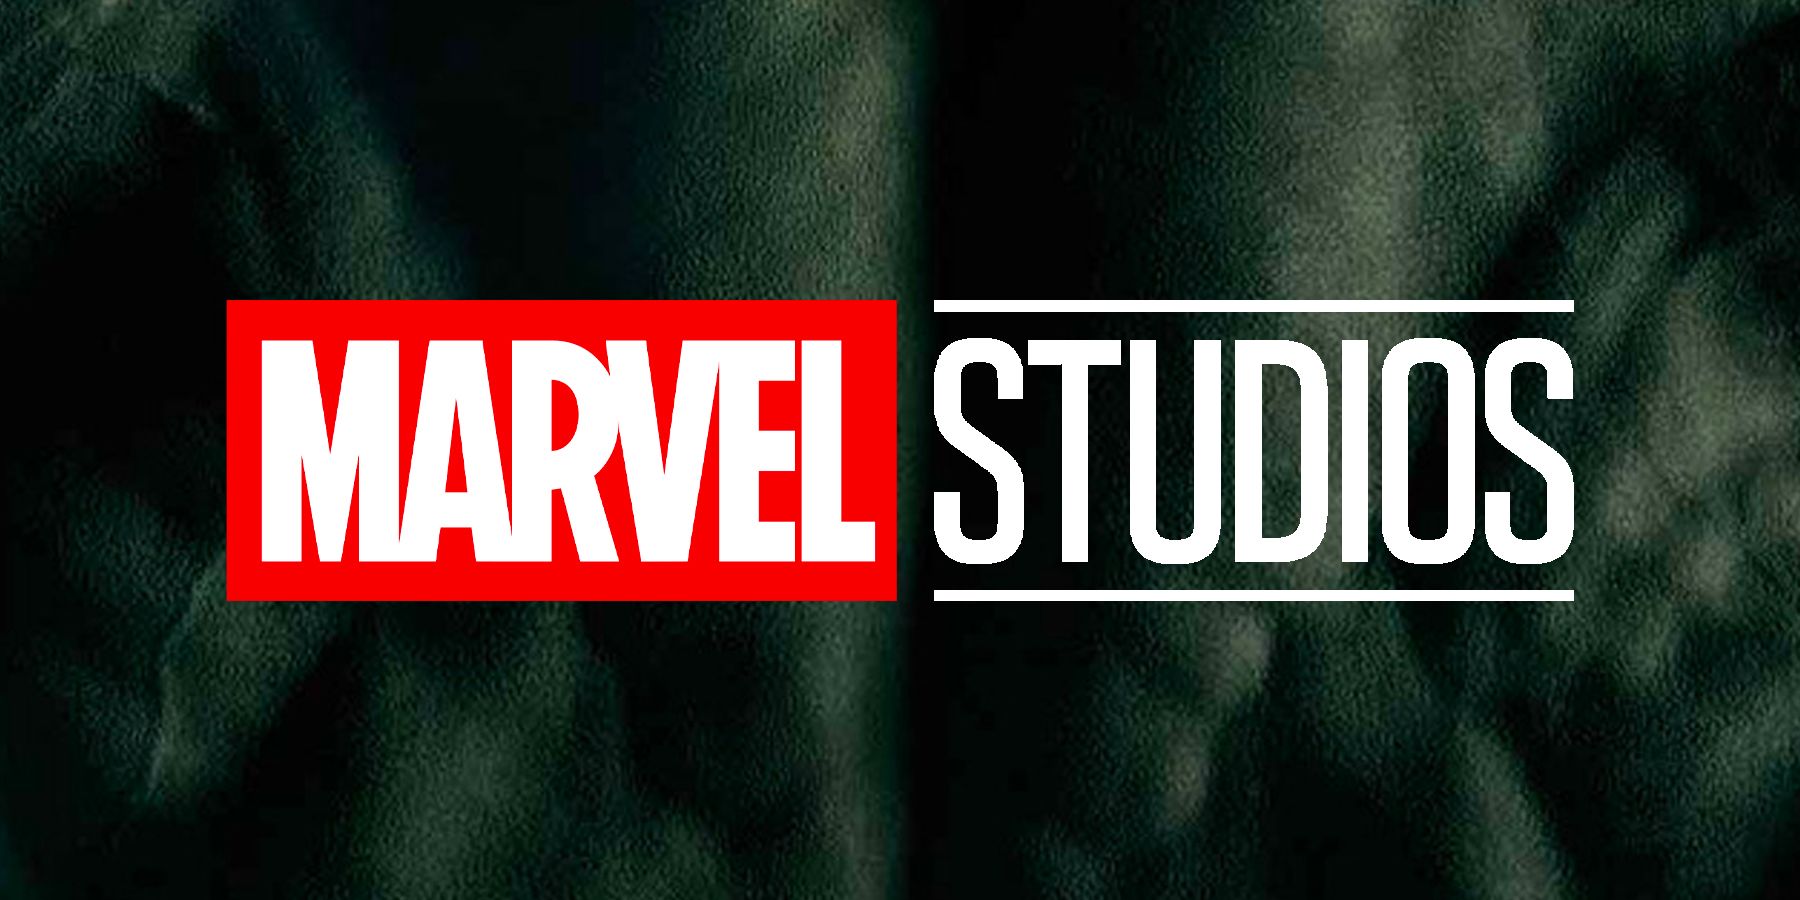 Details Of Marvel's 'Hulk' Film Rights - Fans Can Relax About Sequel